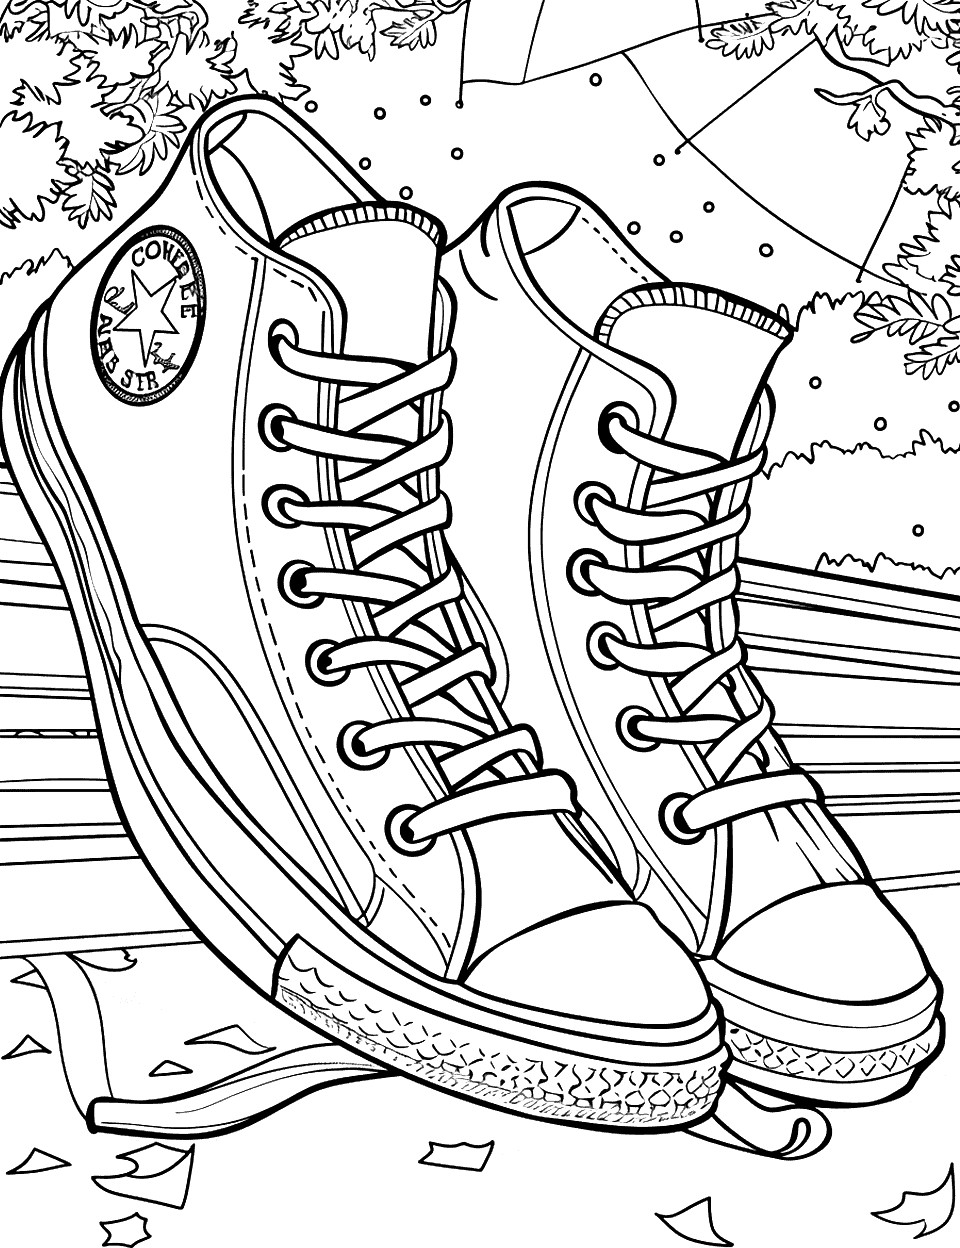 Converse Shoes at the Park Shoe Coloring Page - Two Converse sneakers side by side on a park bench with trees in the background.